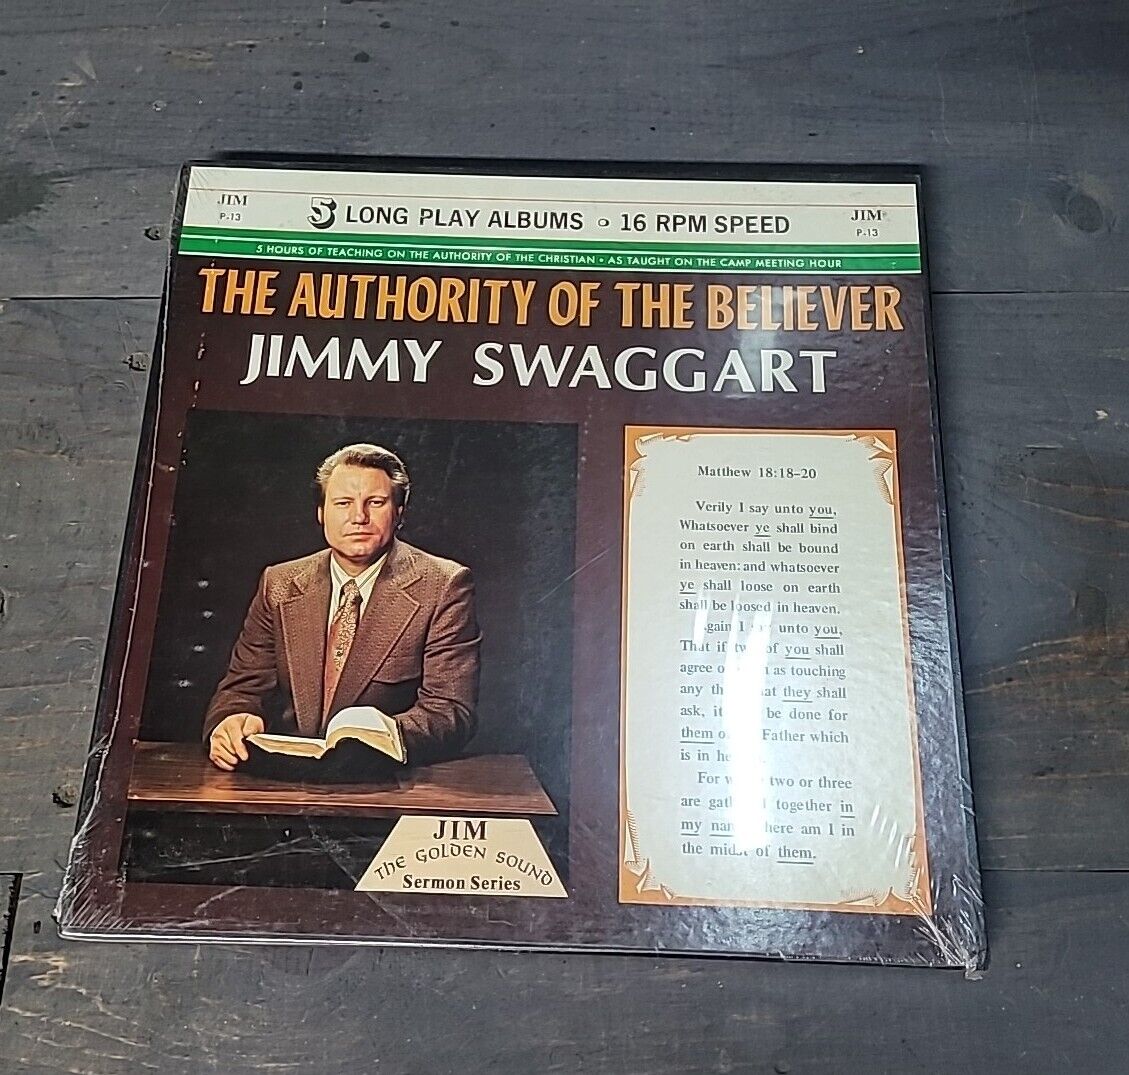 Vtg JIMMY SWAGGART Vinyl Box Set Authority Of The Believer 5 LP 16 rpm SEALED 33